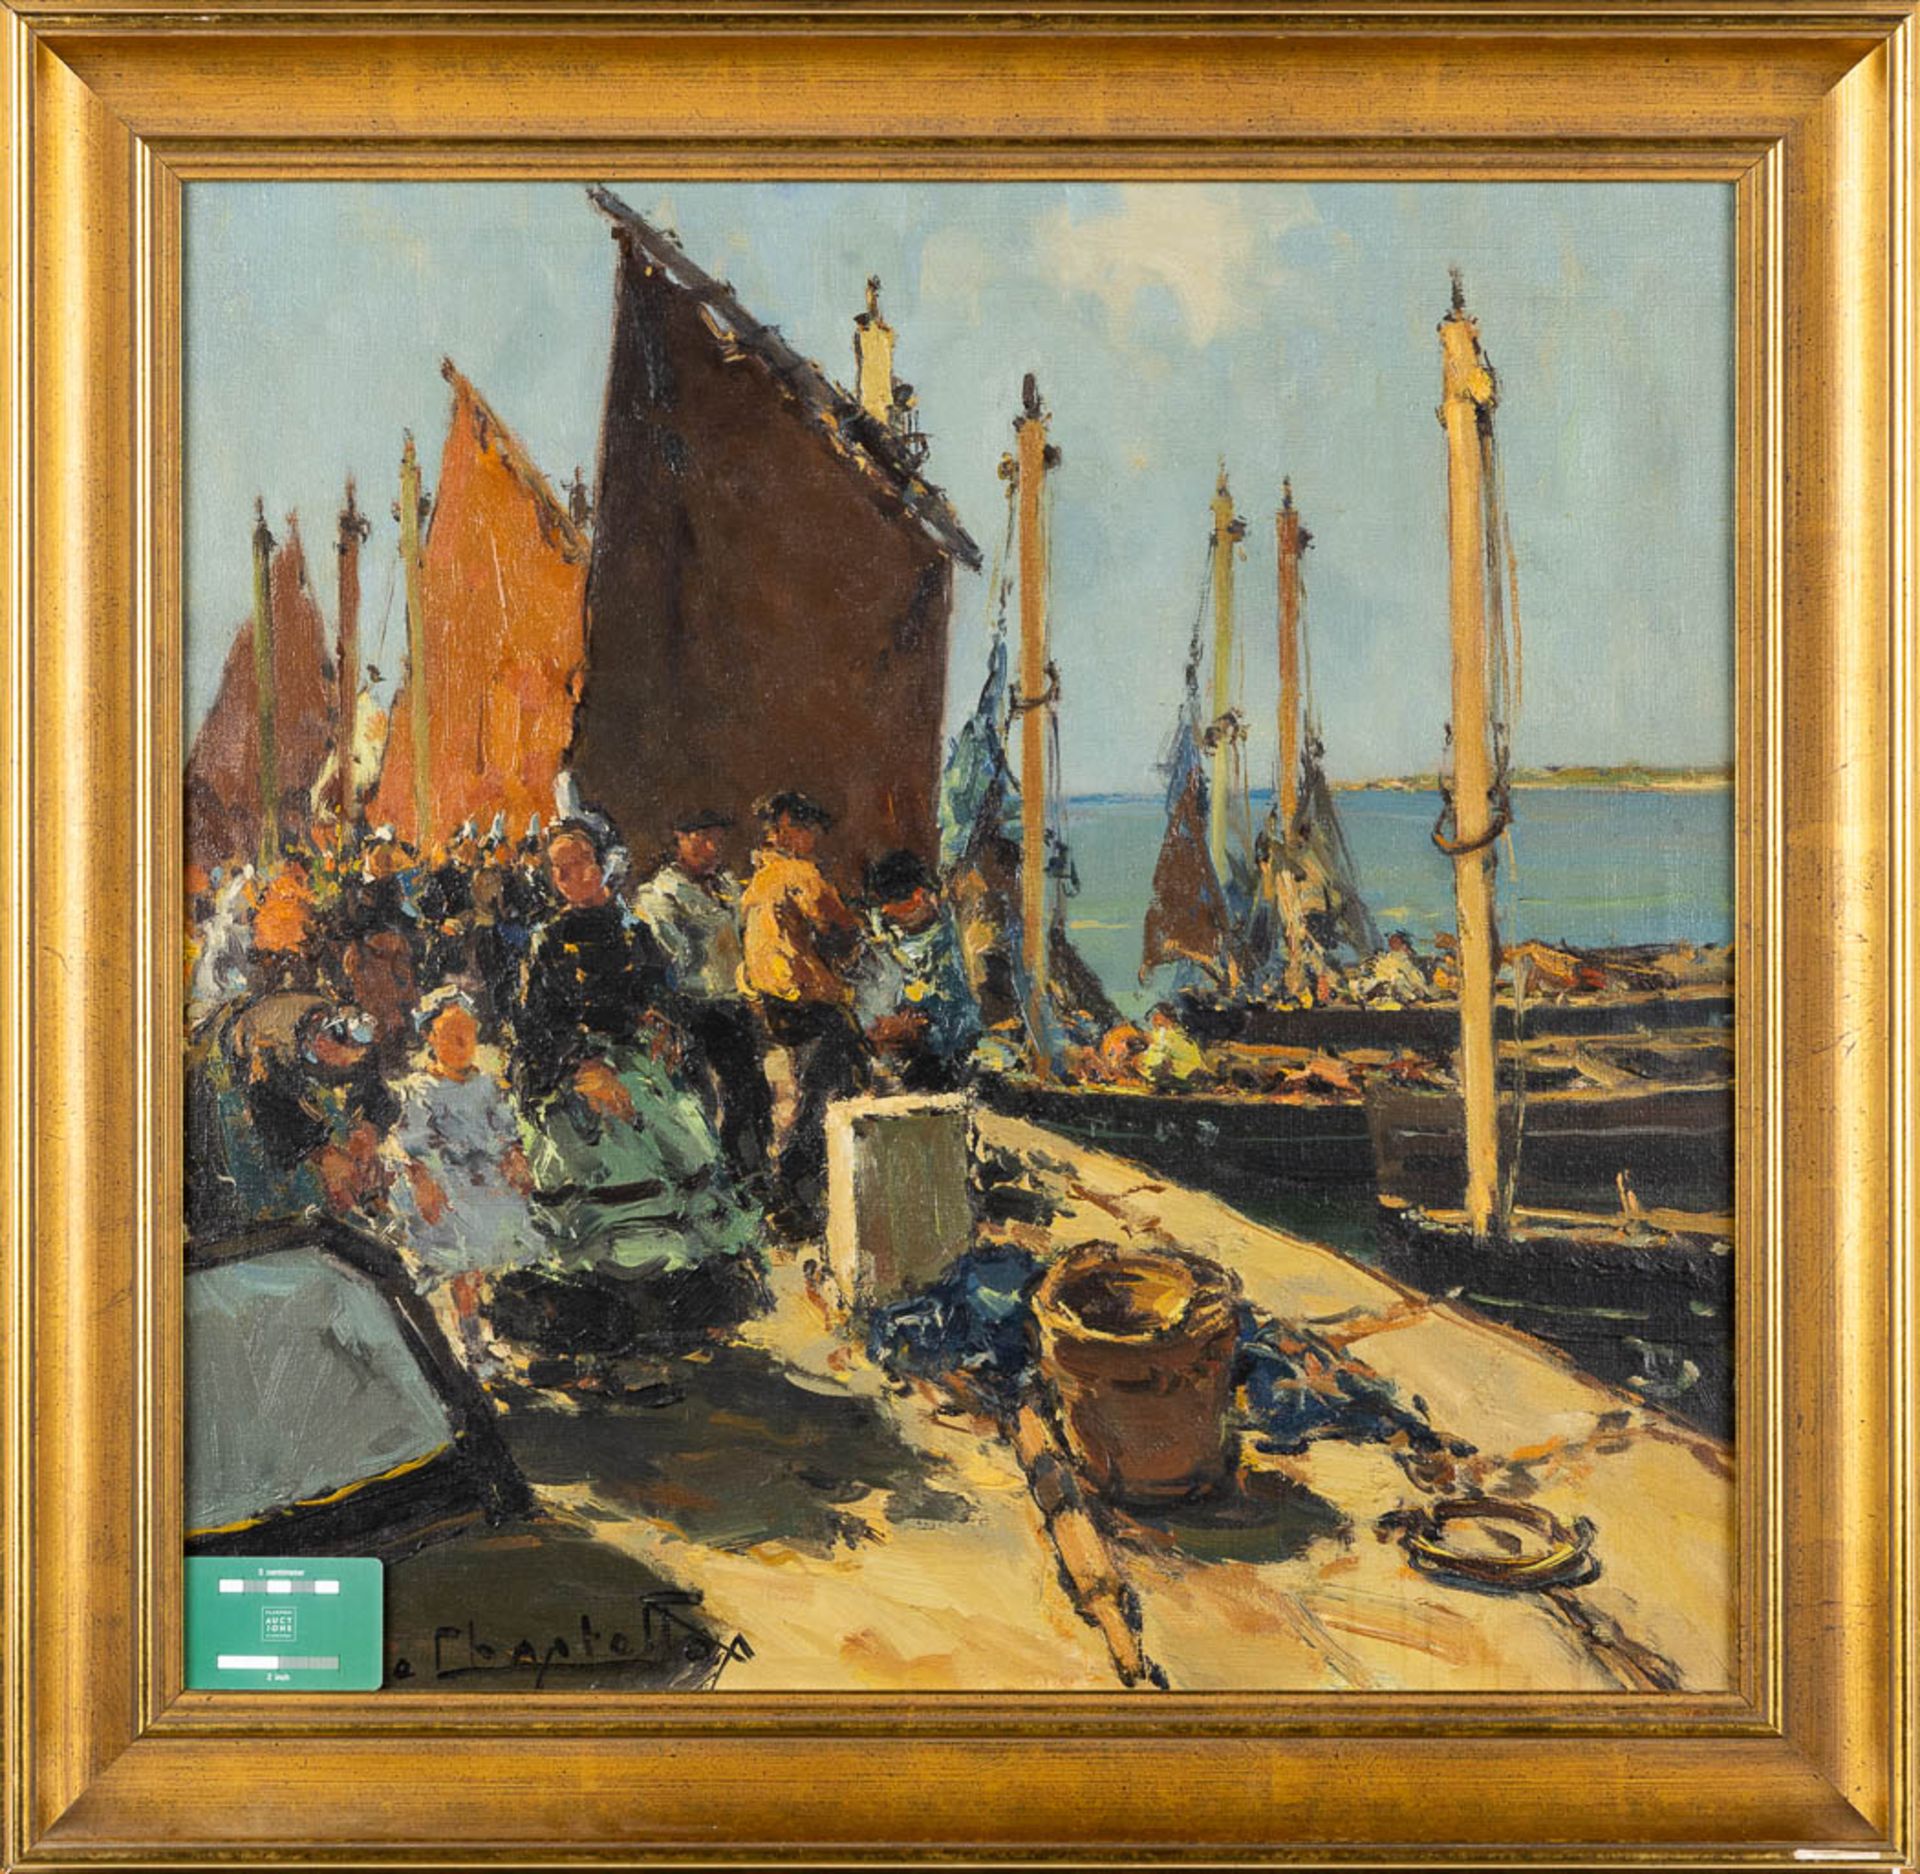 Jacques DE CHASTELLUS (1894-1957) 'On the dock' oil on canvas. (W:67 x H:65 cm) - Image 2 of 6